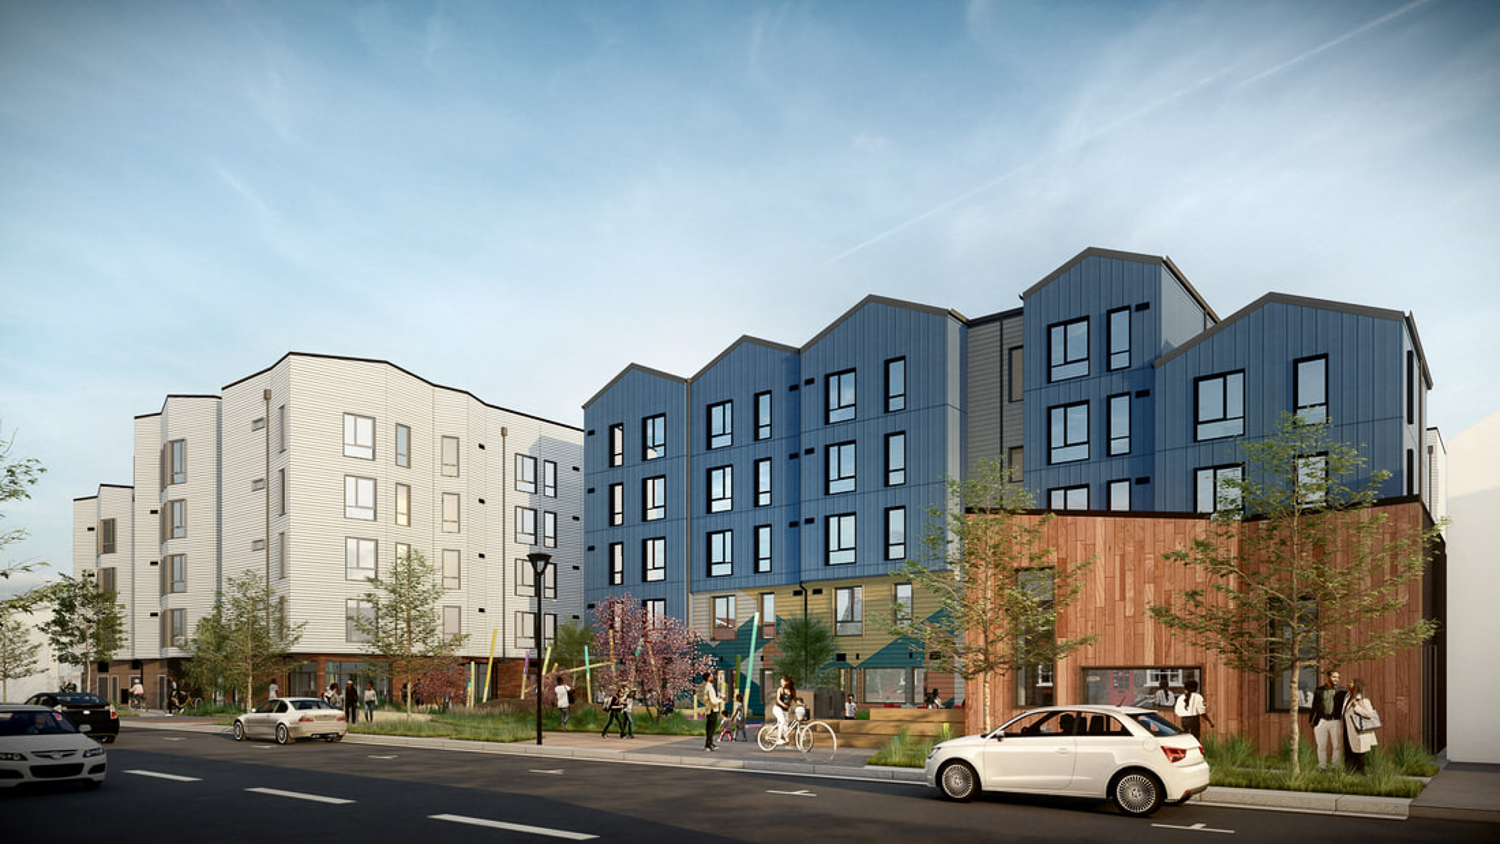 Shirley Chisholm Village Educator Housing, rendering by BAR Architecture